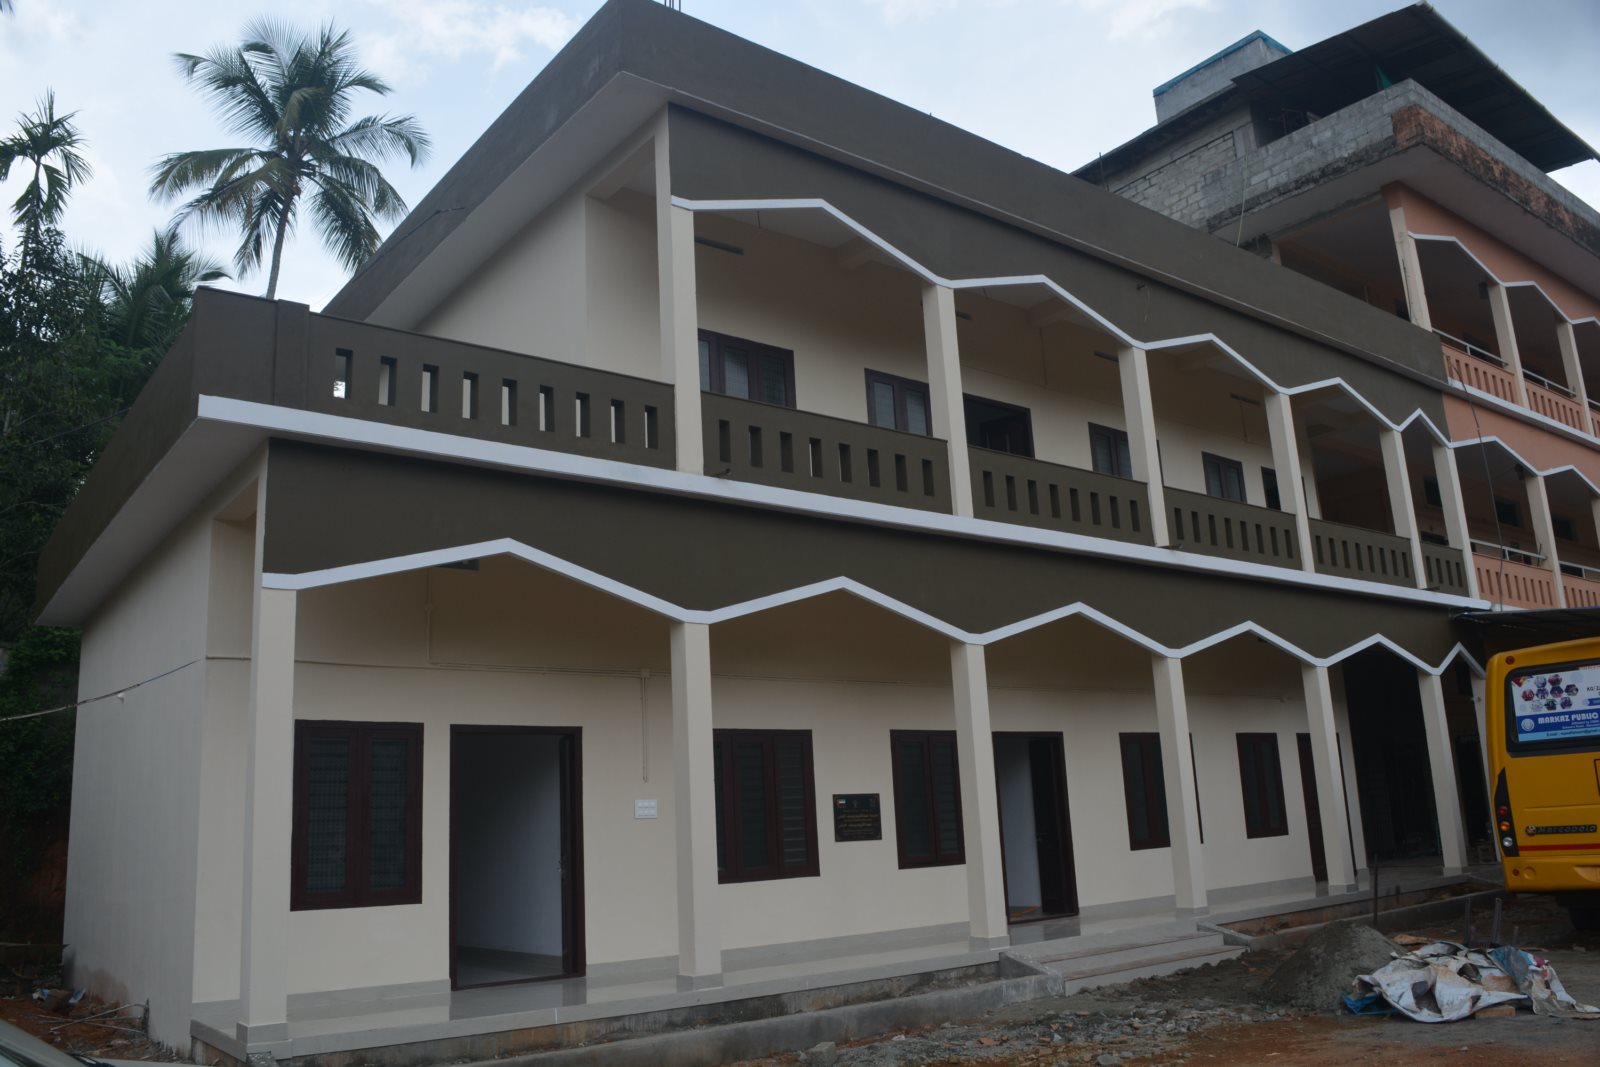 A School Of 8 Classrooms With A Reinforced Roof